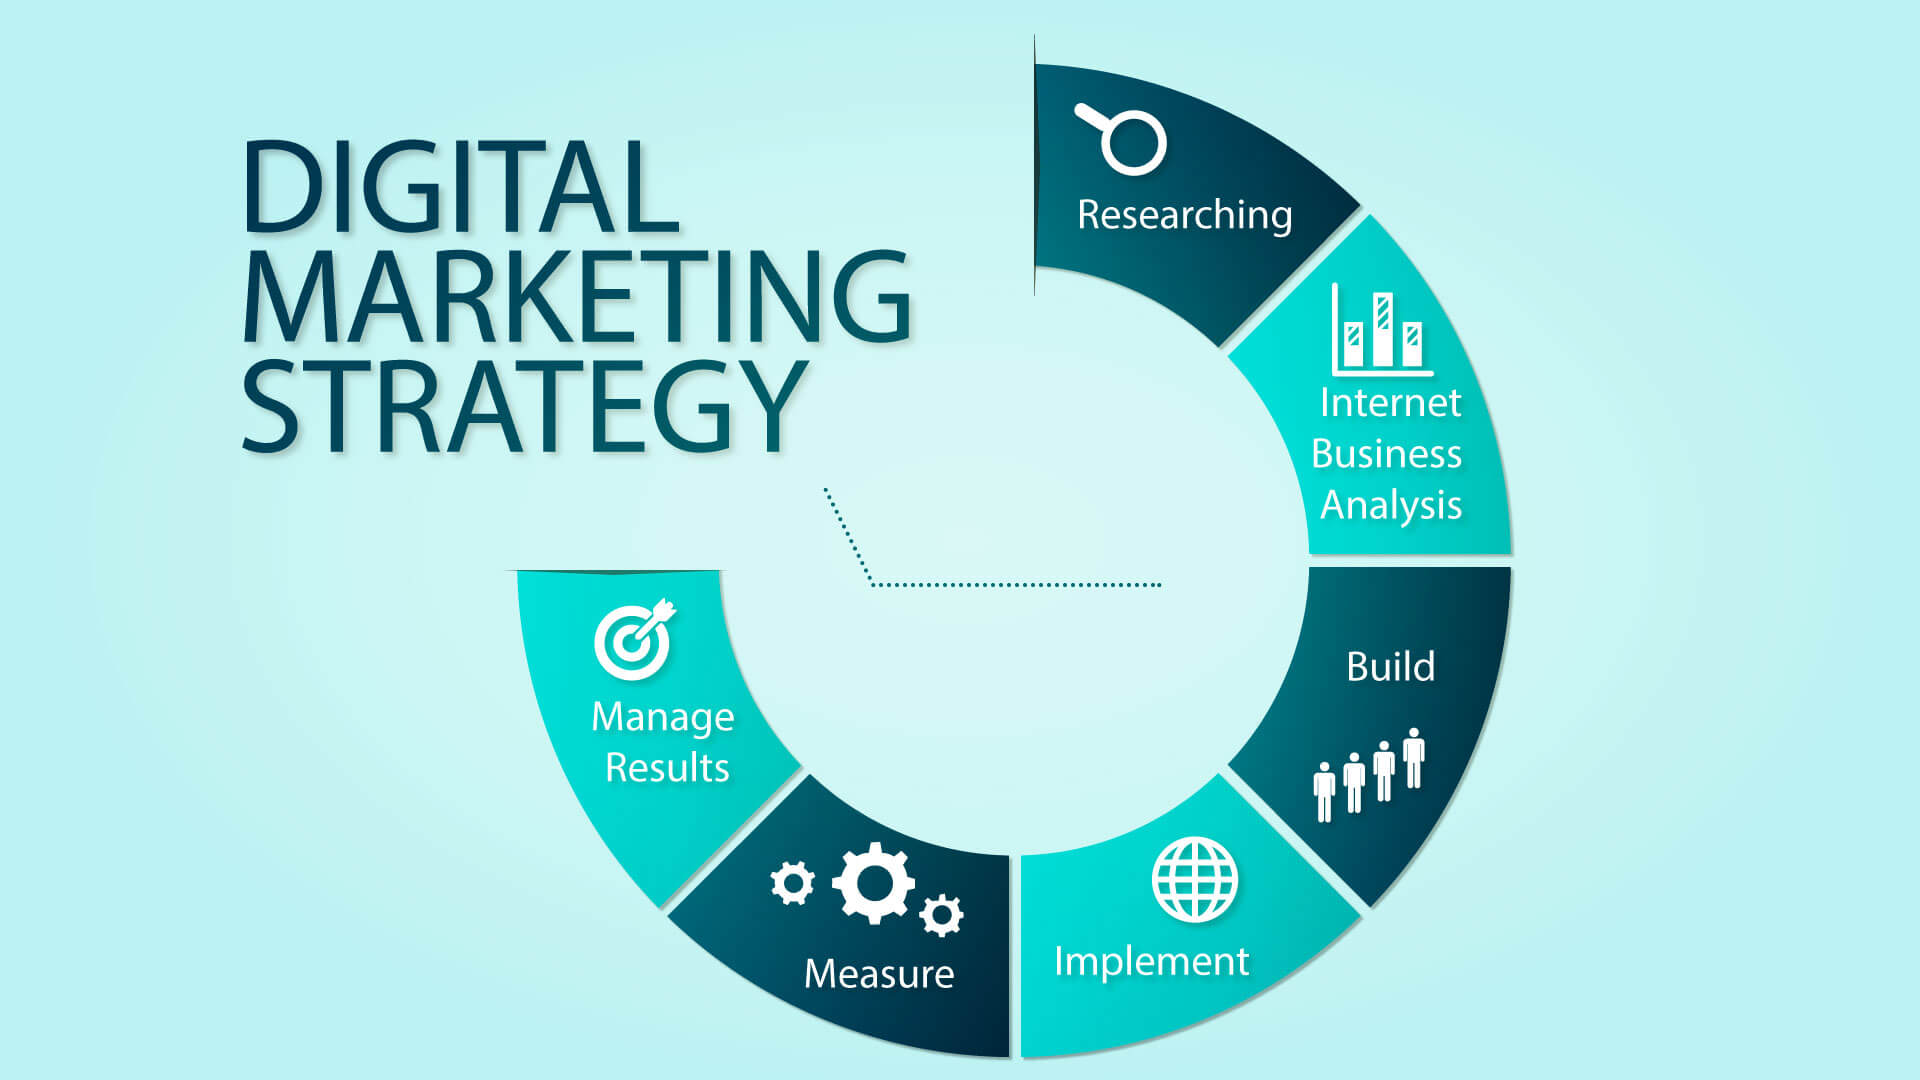 Building Digital Marketing Strategy from Scratch